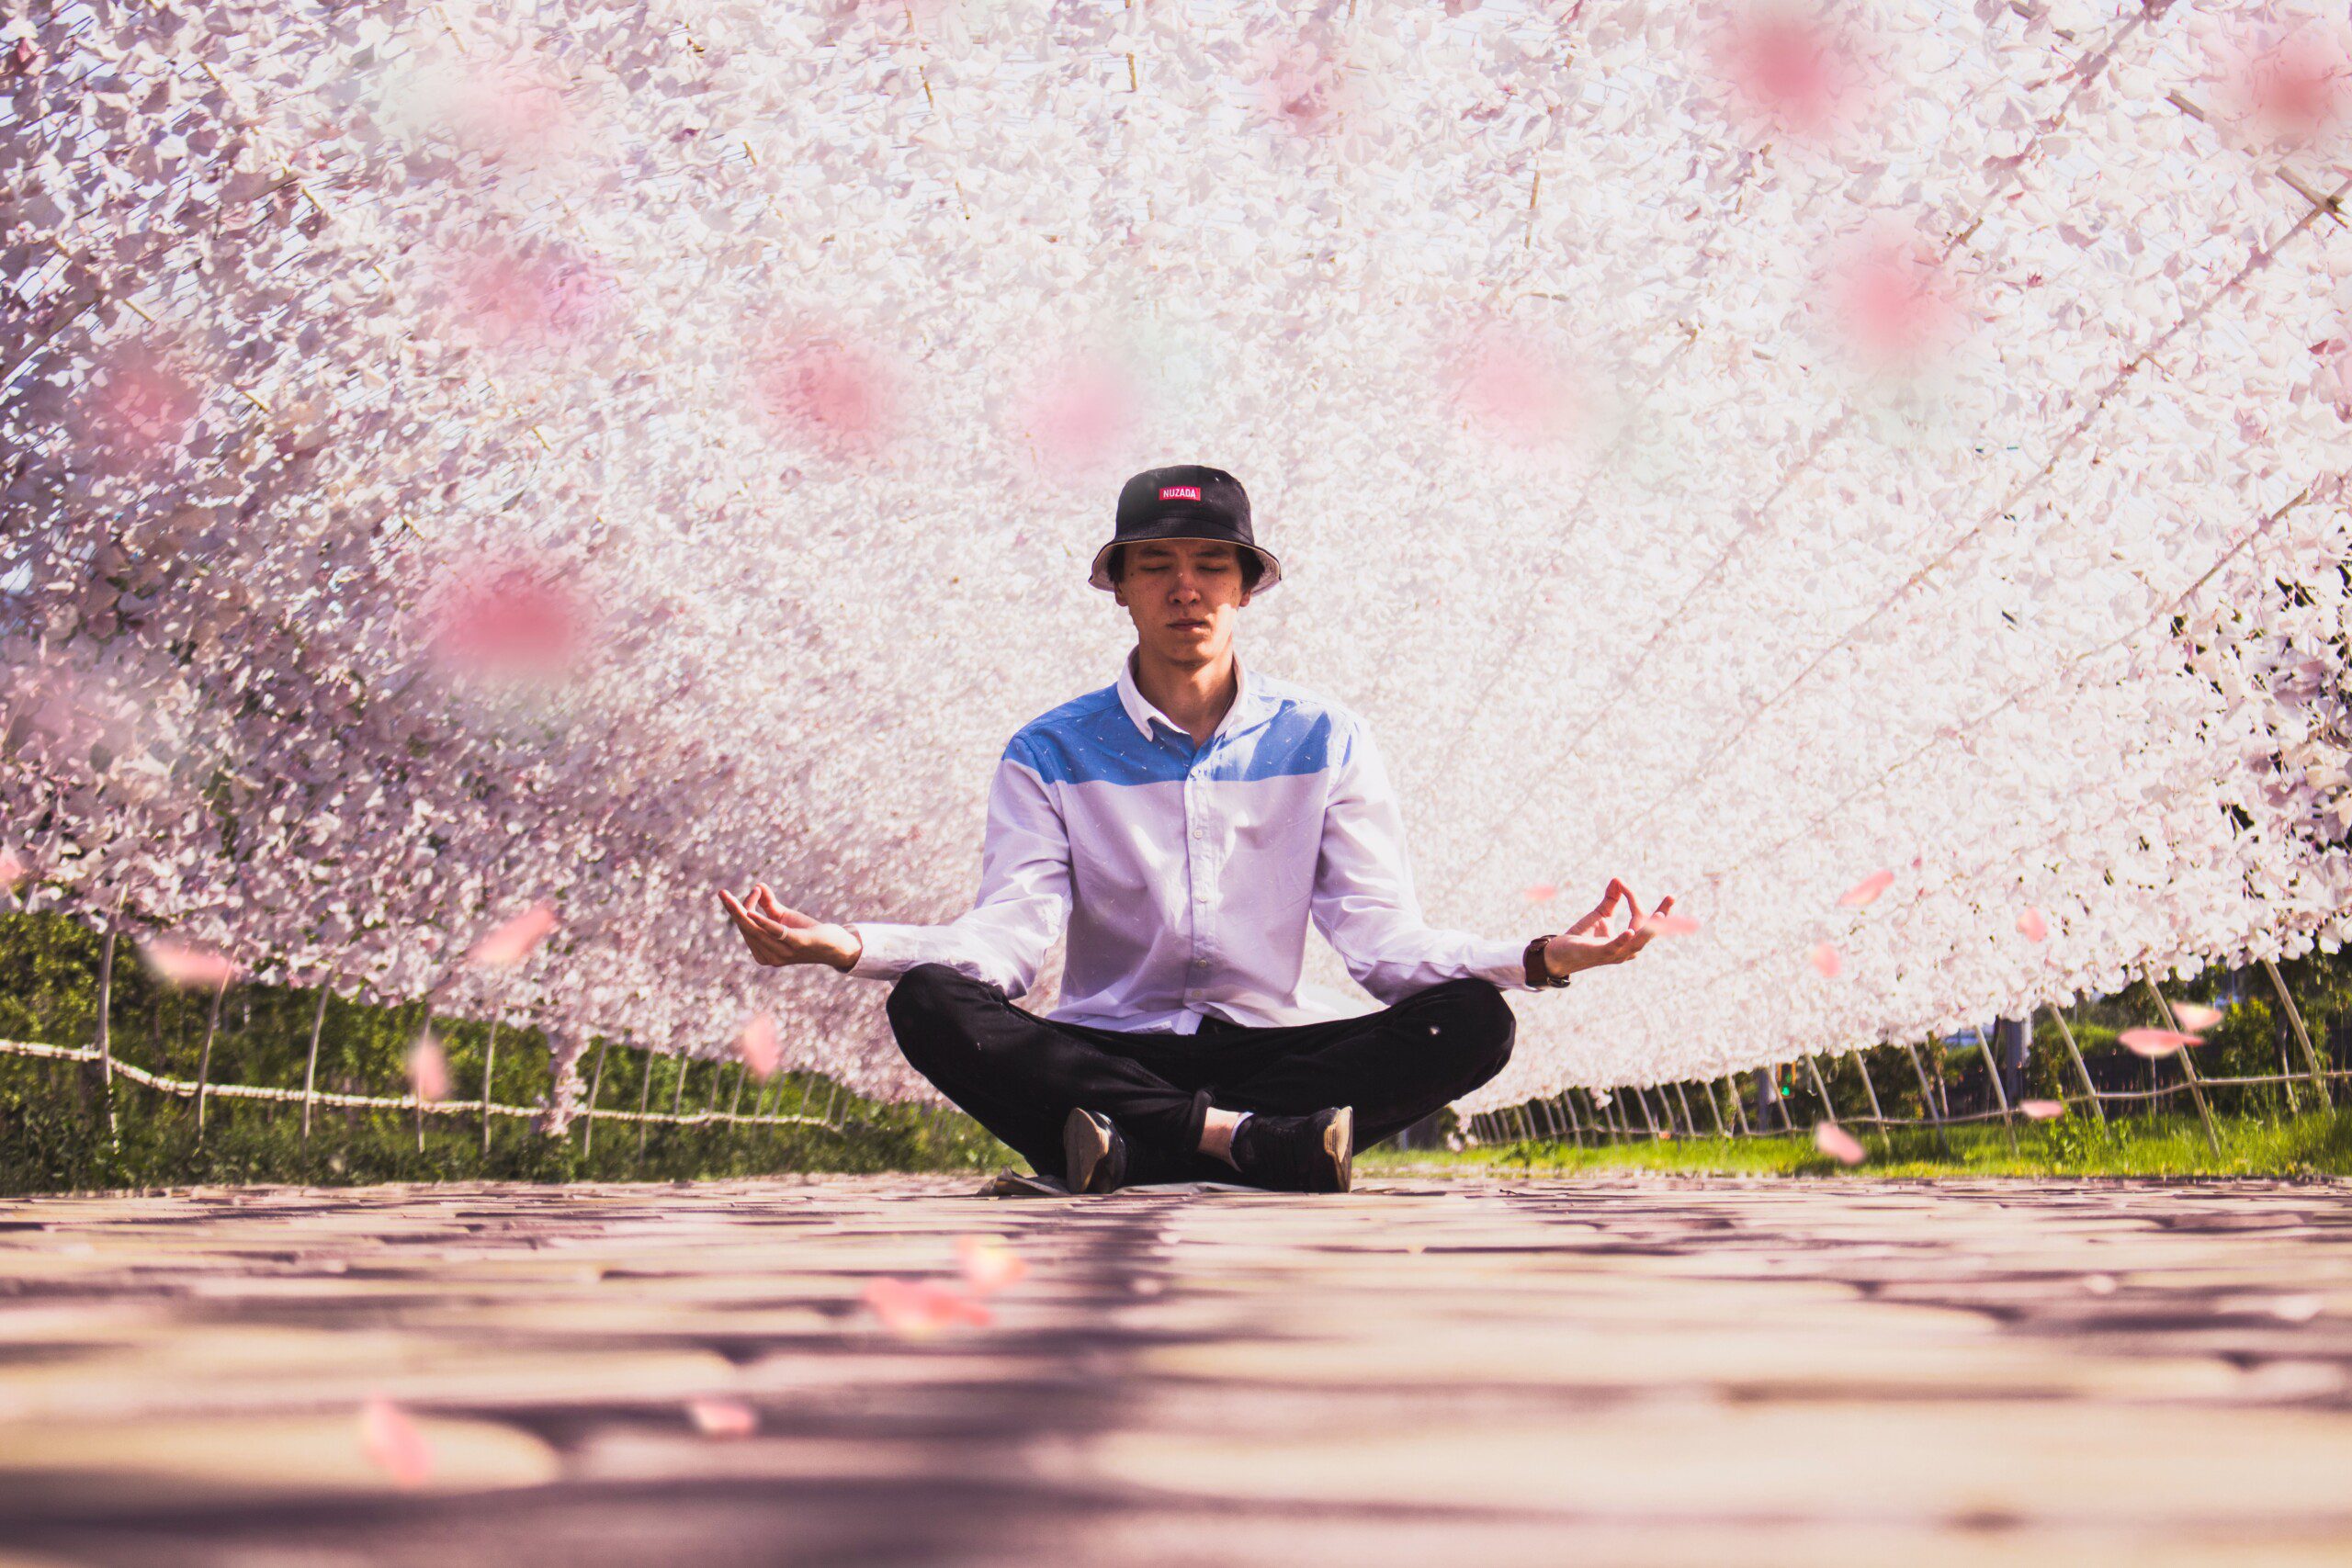 A man meditates amidst cherry blossoms with an arc of water streaming overhead.